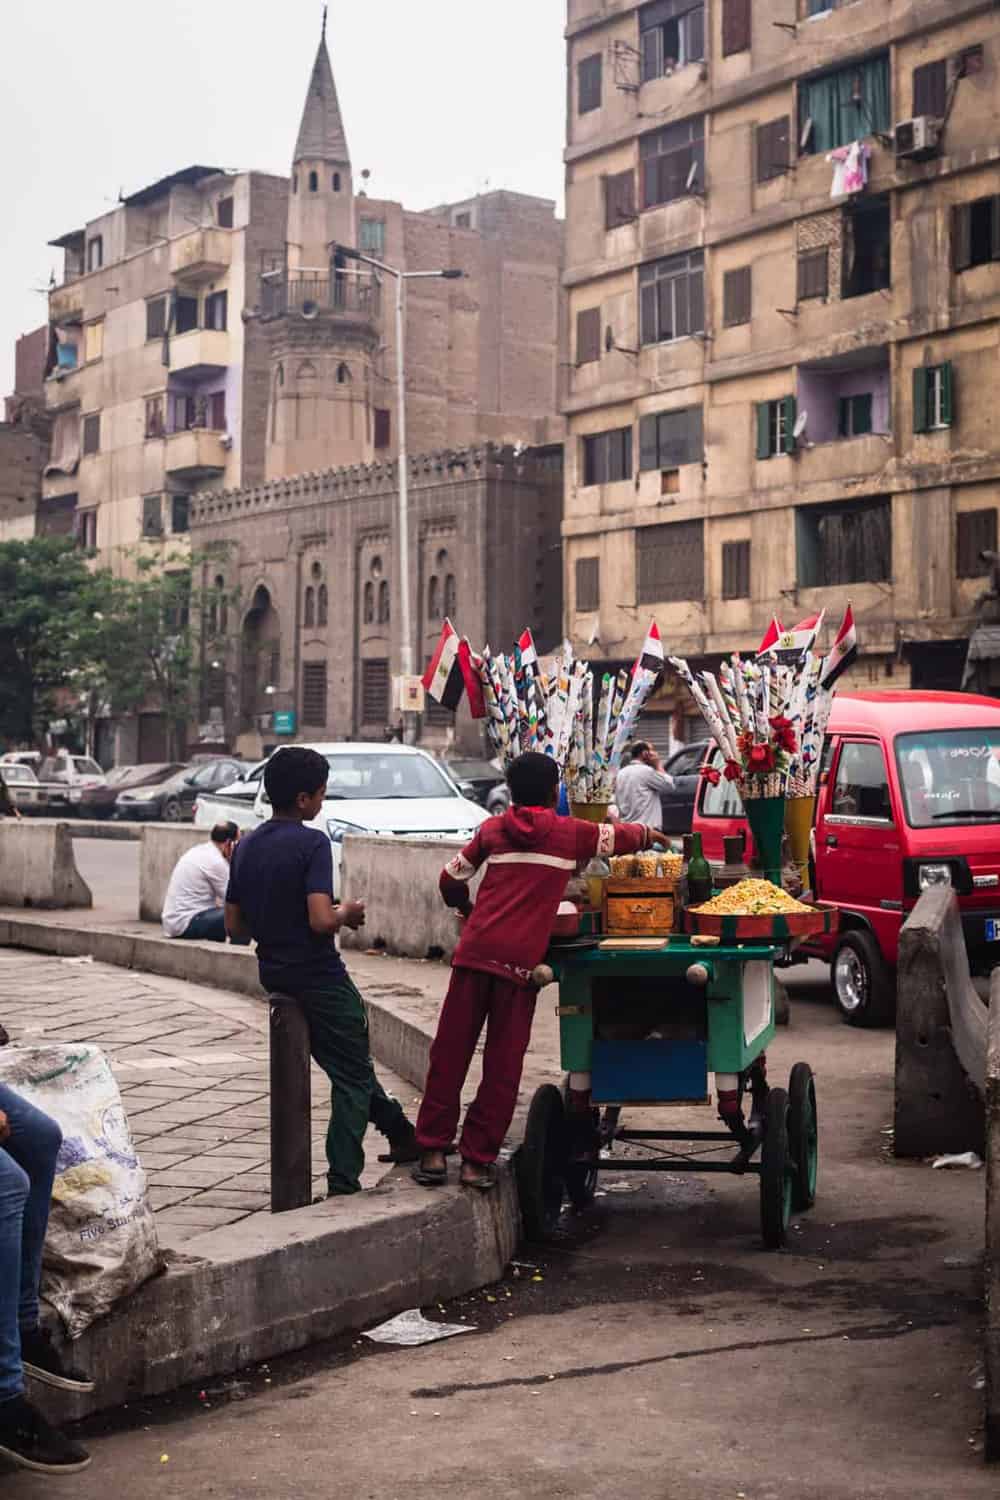 Kids selling candy right outside the gates to Old Cairo.